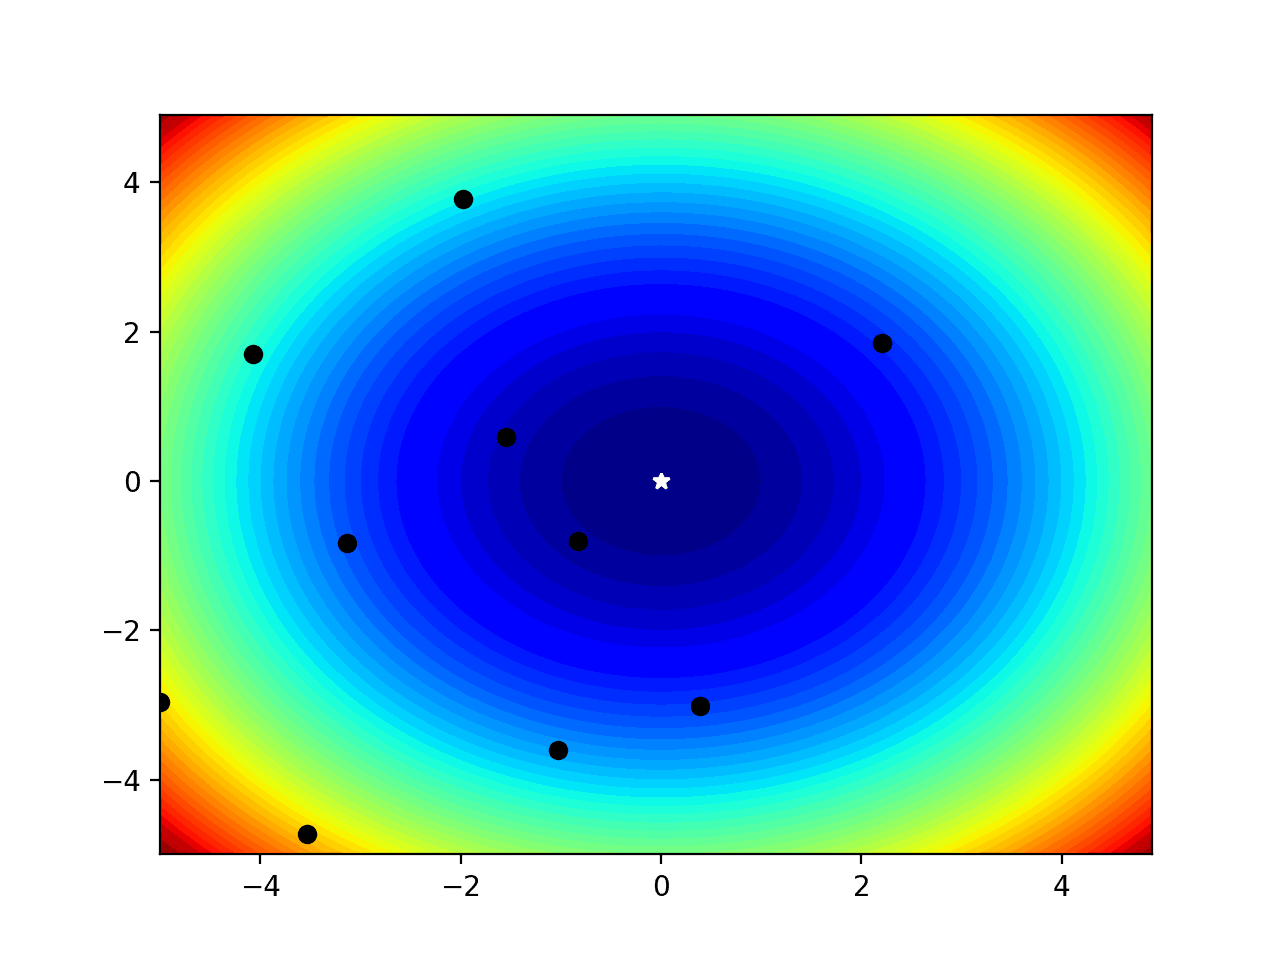 Filled Contour Plot of a Two-Dimensional Objective Function With Optima and Input Sample Marked